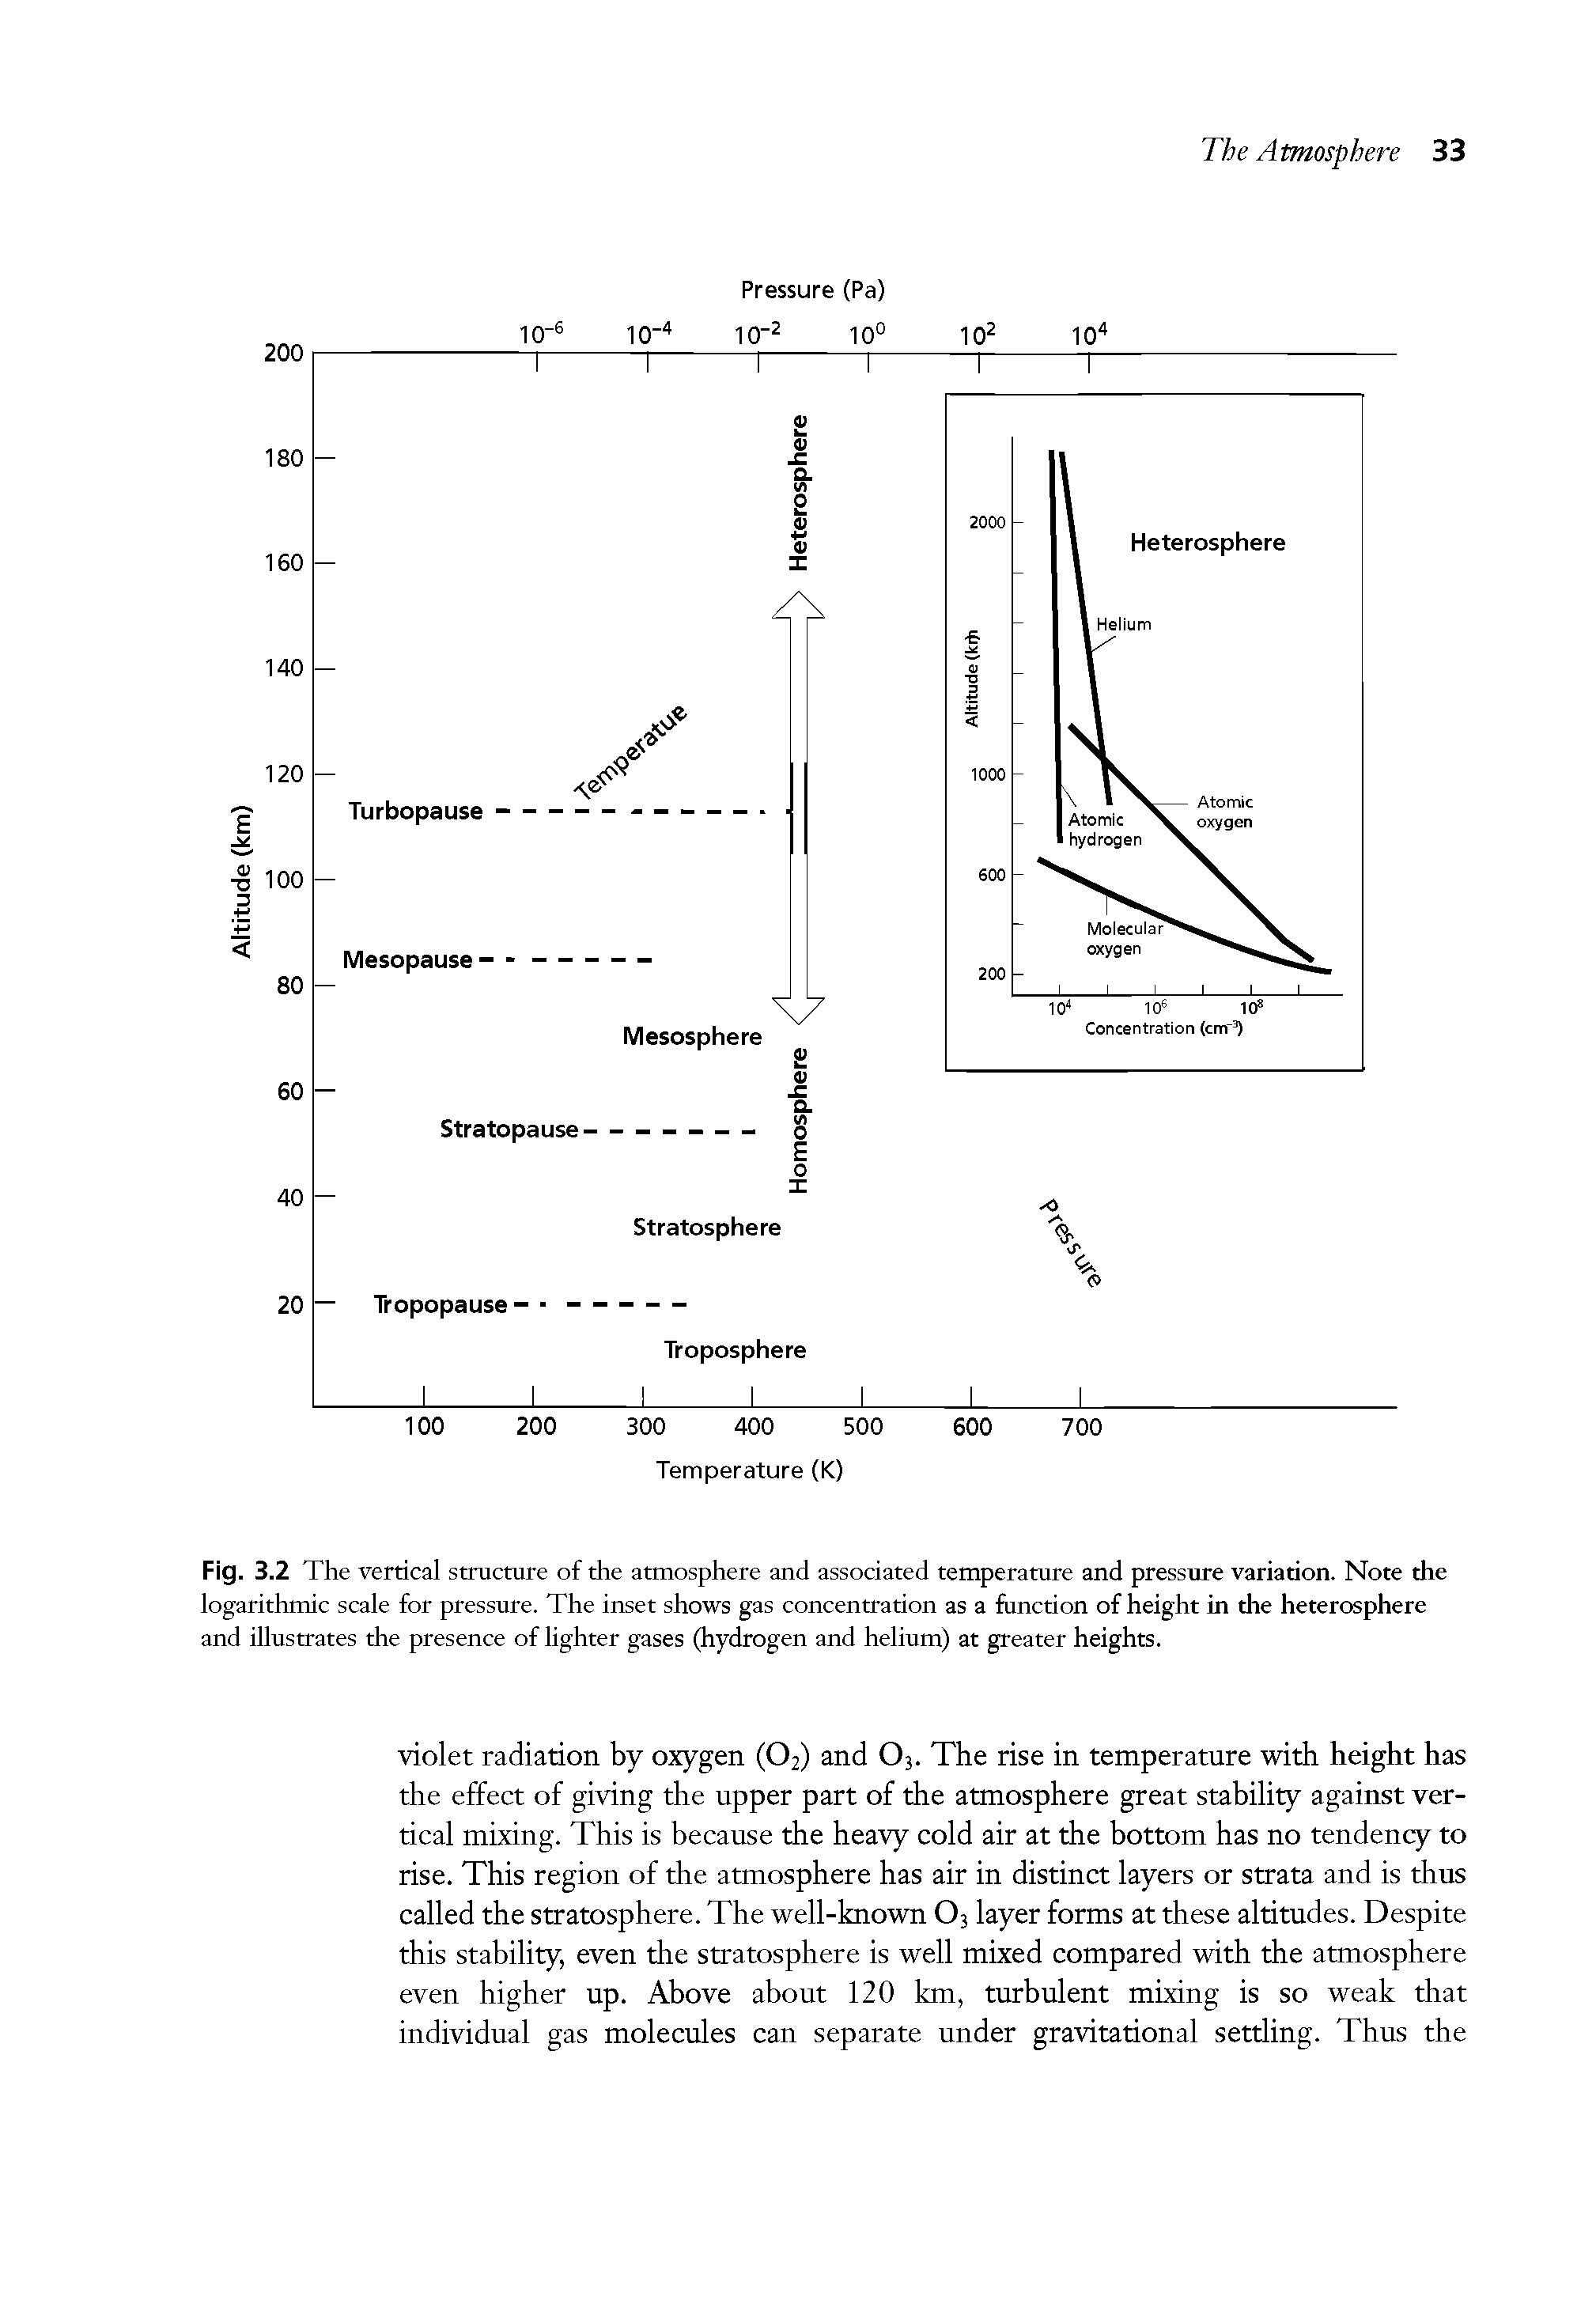 Fig. 3.2 The vertical structure of the atmosphere and associated temperature and pressure variation. Note the logarithmic scale for pressure. The inset shows gas concentration as a function of height in the heterosphere and illustrates the presence of lighter gases (hydrogen and helium) at greater heights.